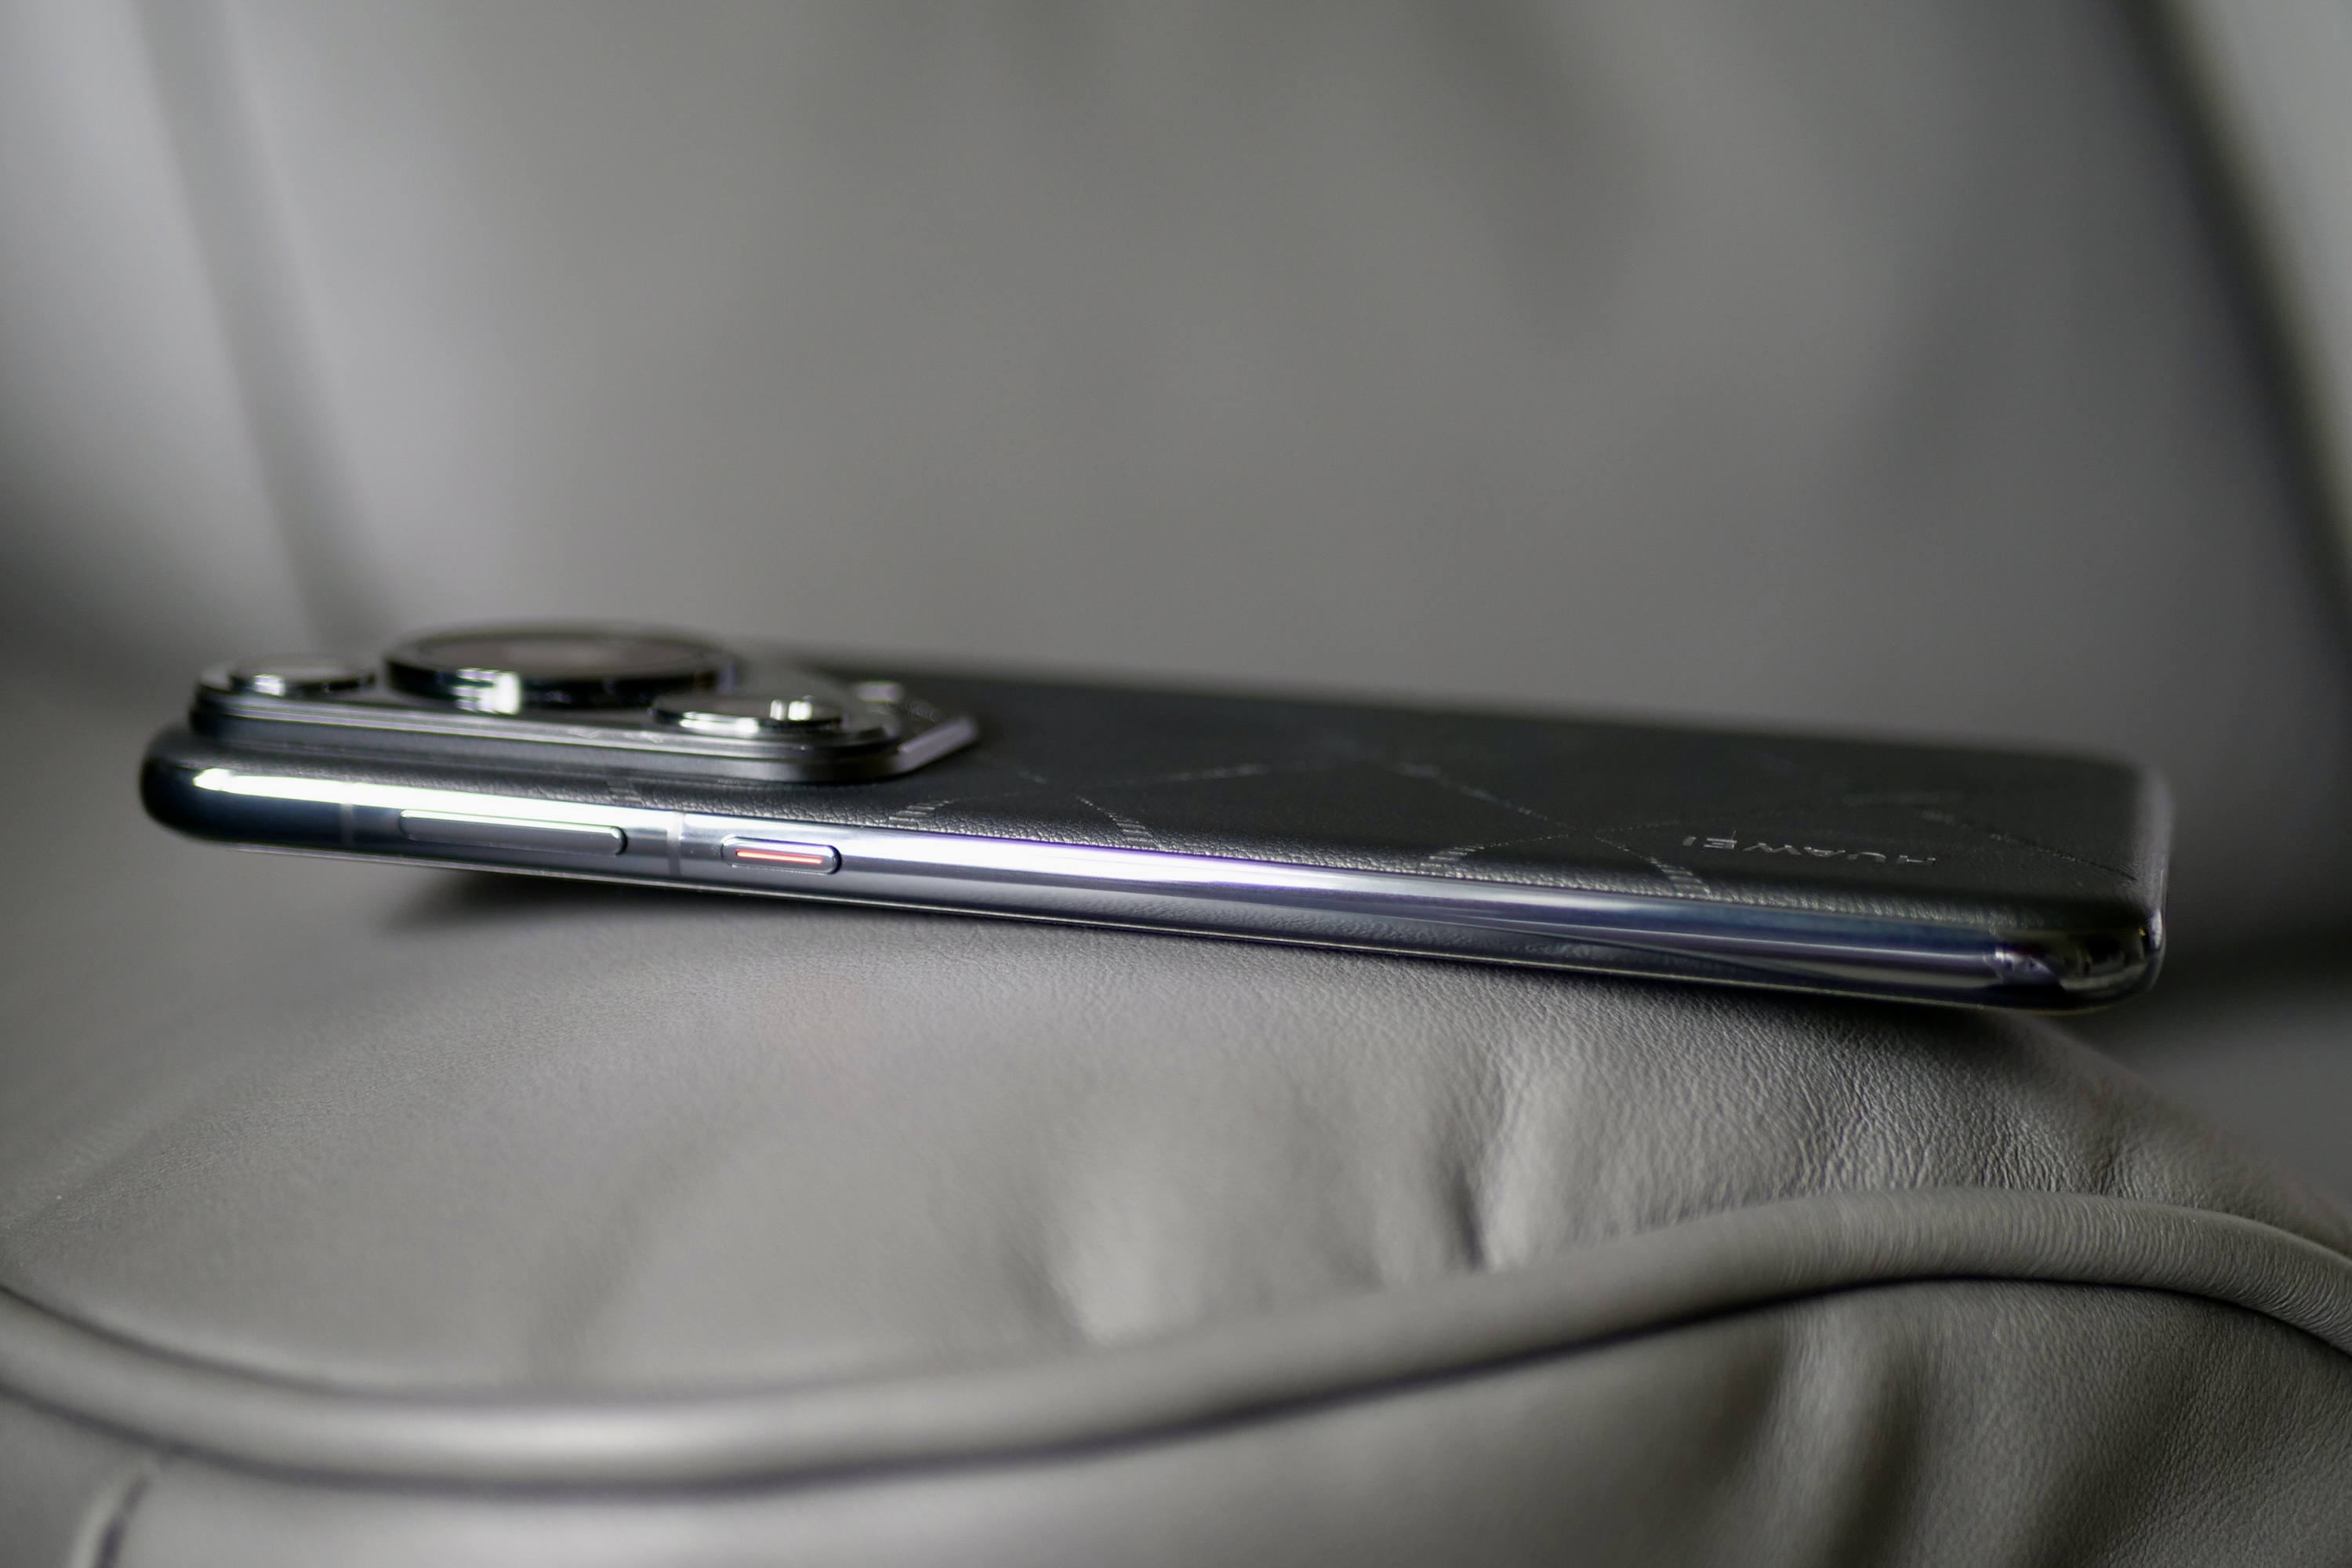 The side of the Huawei Pura 70 Ultra.